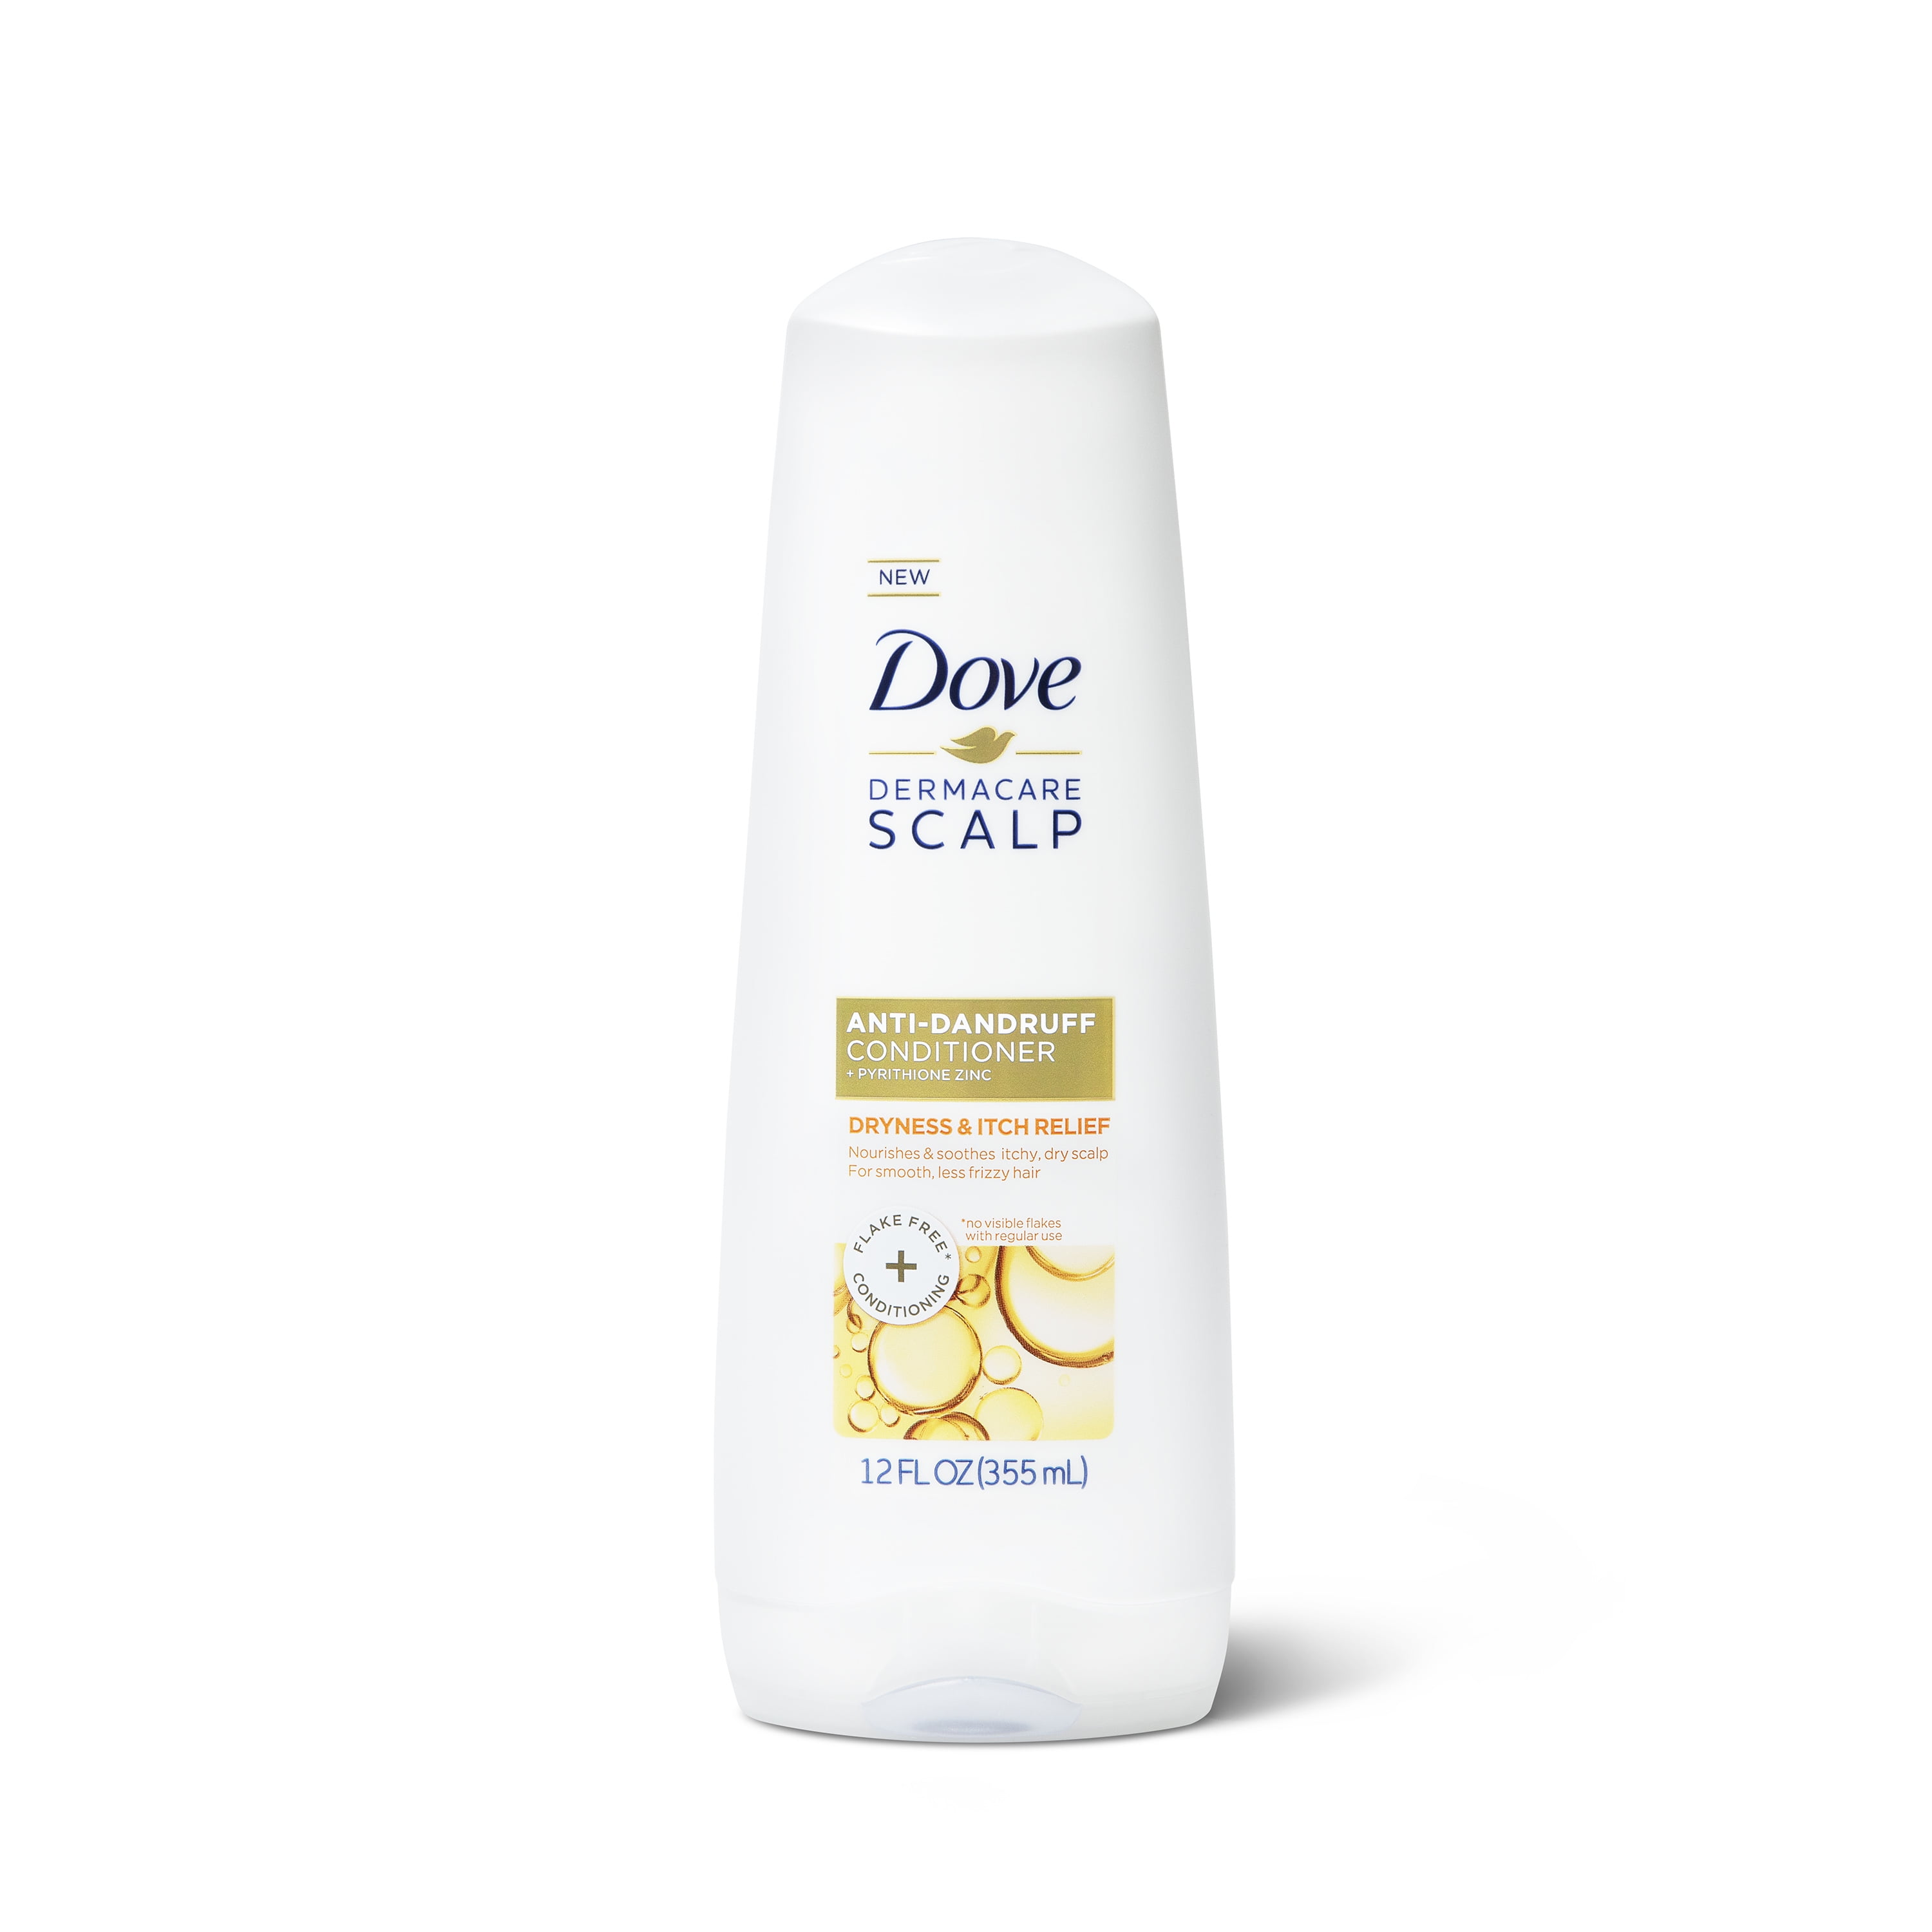 Dove DermaCare Scalp Dryness and Itch Relief Anti-Dandruff Conditioner